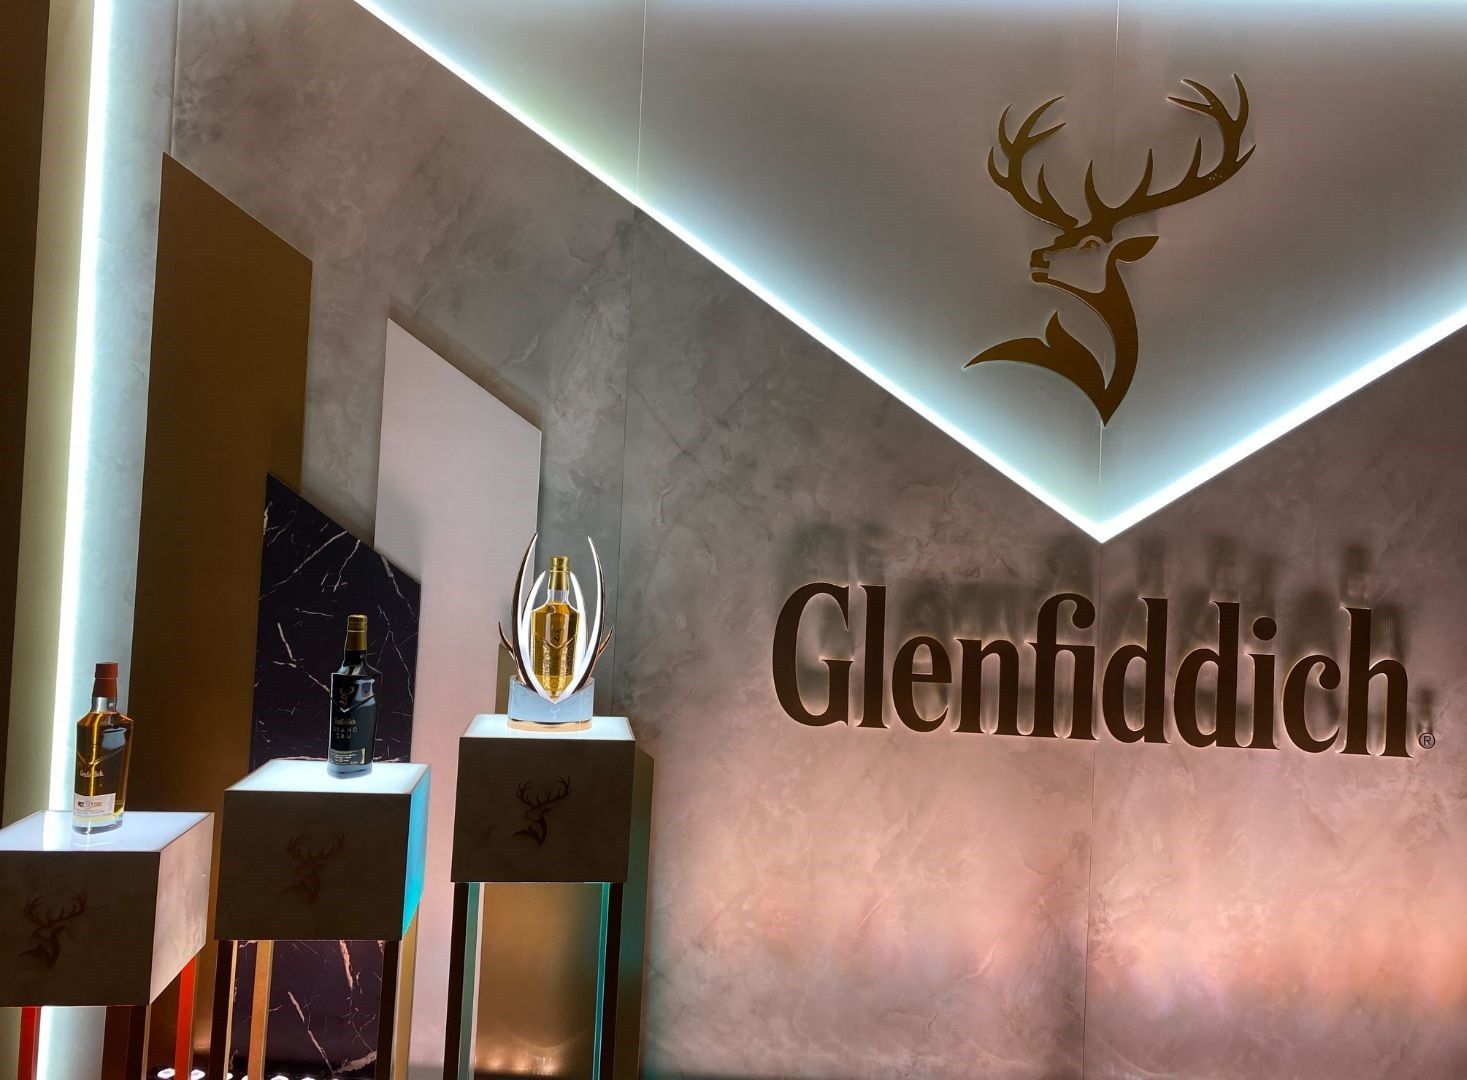 Glenfiddich launches Grand Series to embrace all occasions